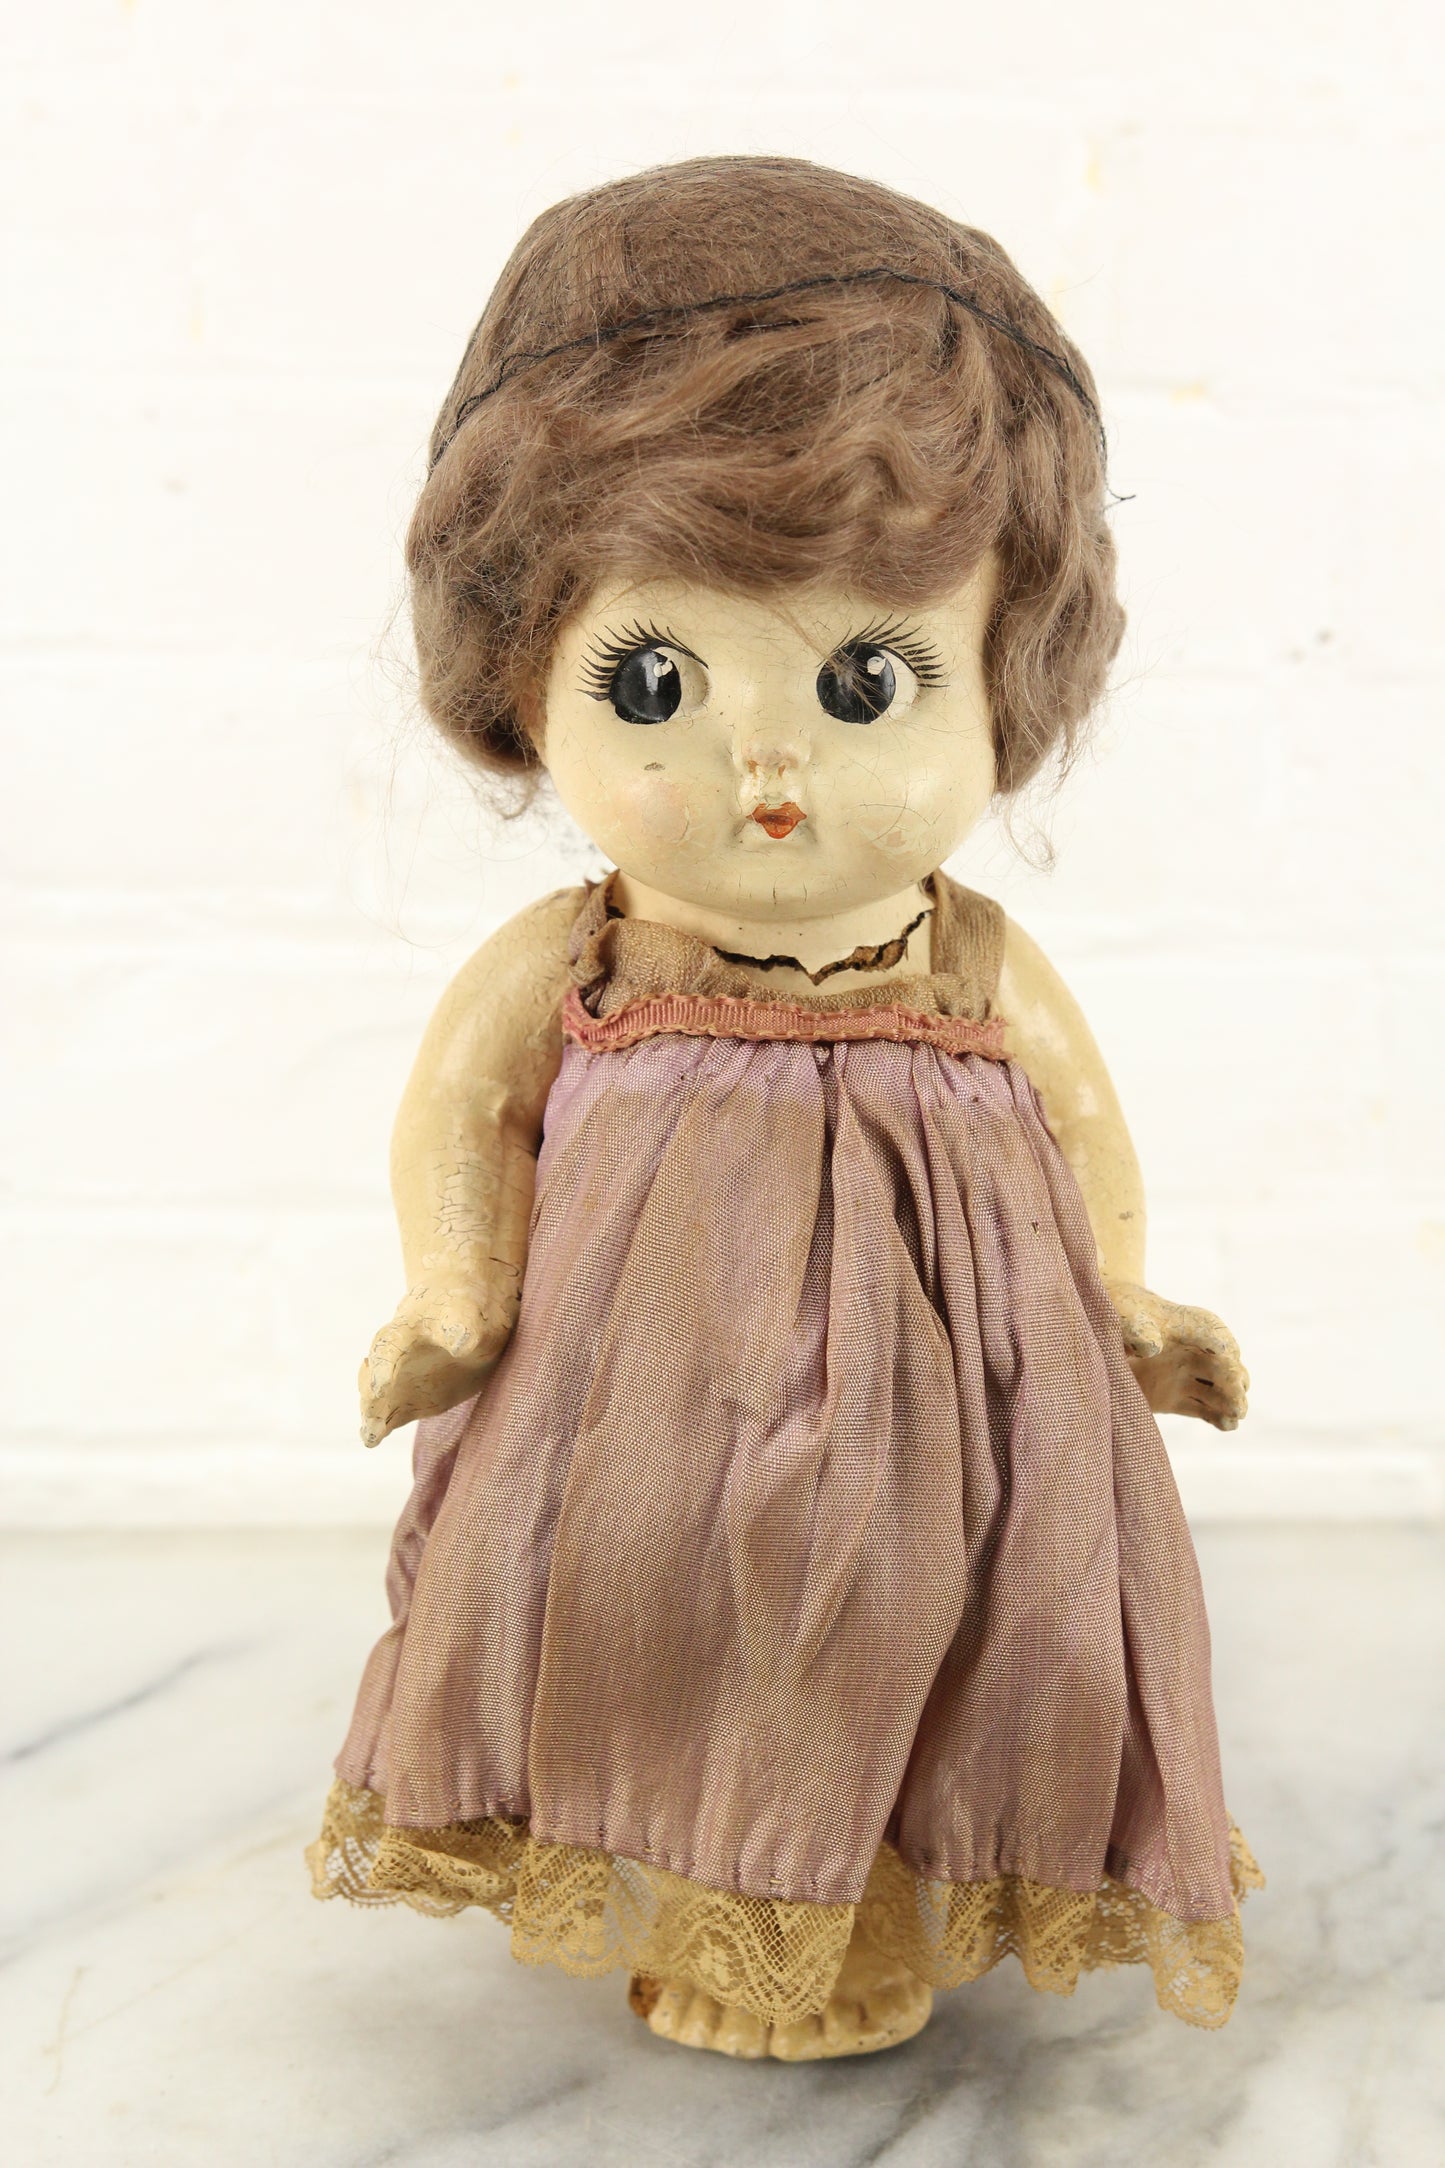 Antique Kewpie Composition Doll with Black Hair Net and Pink Dress, 12"